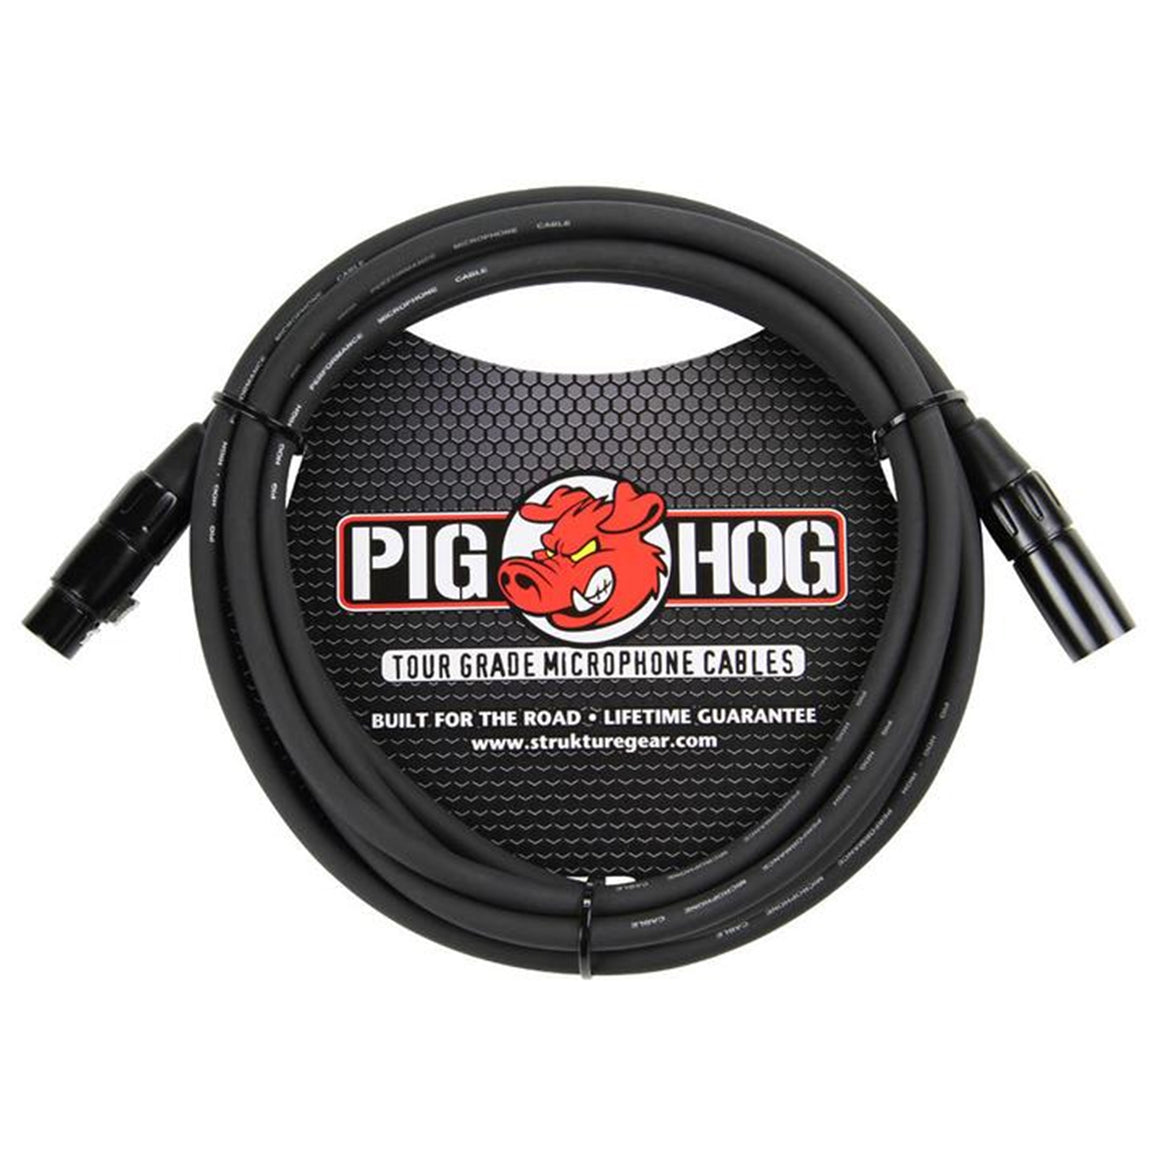 Pig Hog PHM15 15' Microphone Cable 8mm